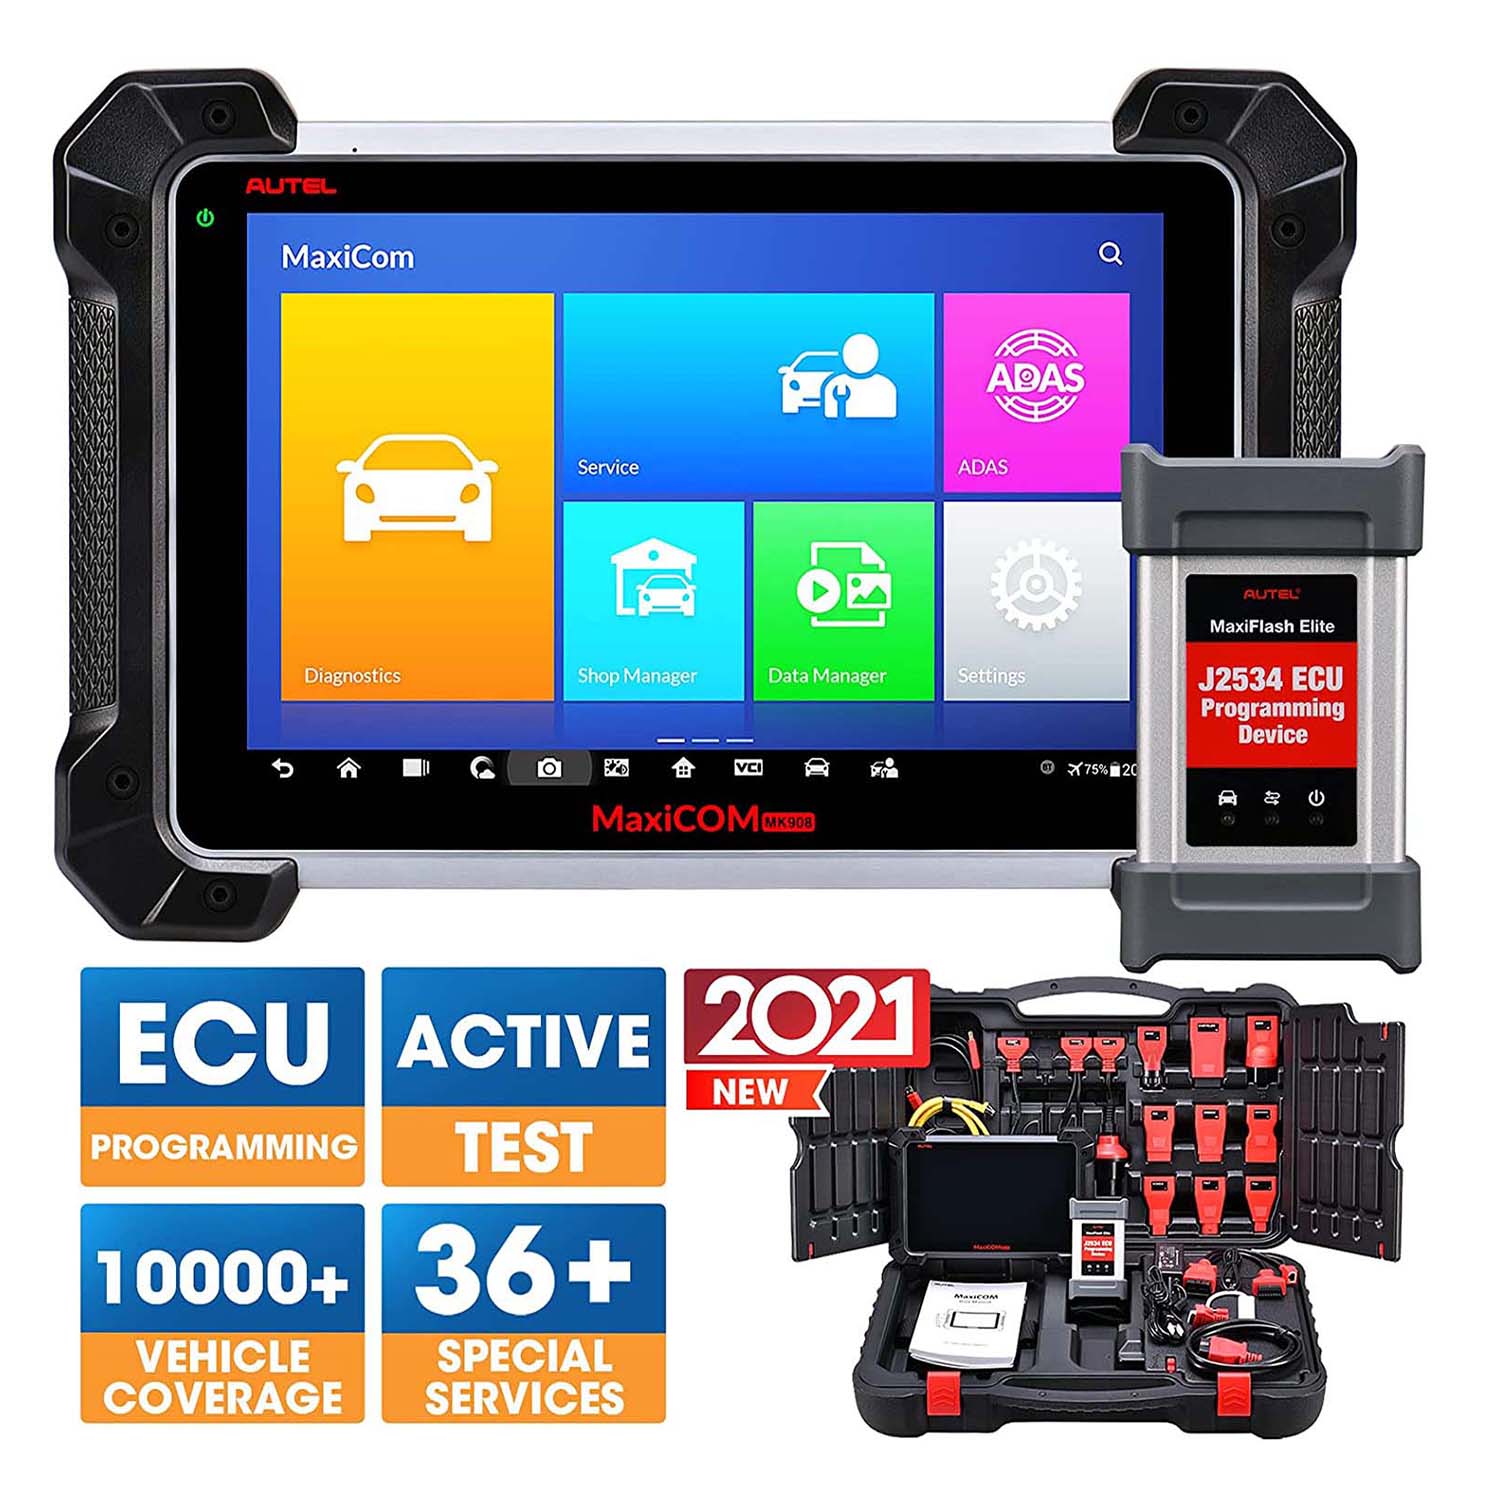 Autel MaxiCOM MK908 Pro II MK908P II Automotive Diagnostic Tablet J2534  Reprogramming Tool Support SCAN VIN and Pre&Post Scan Upgraded of Autel